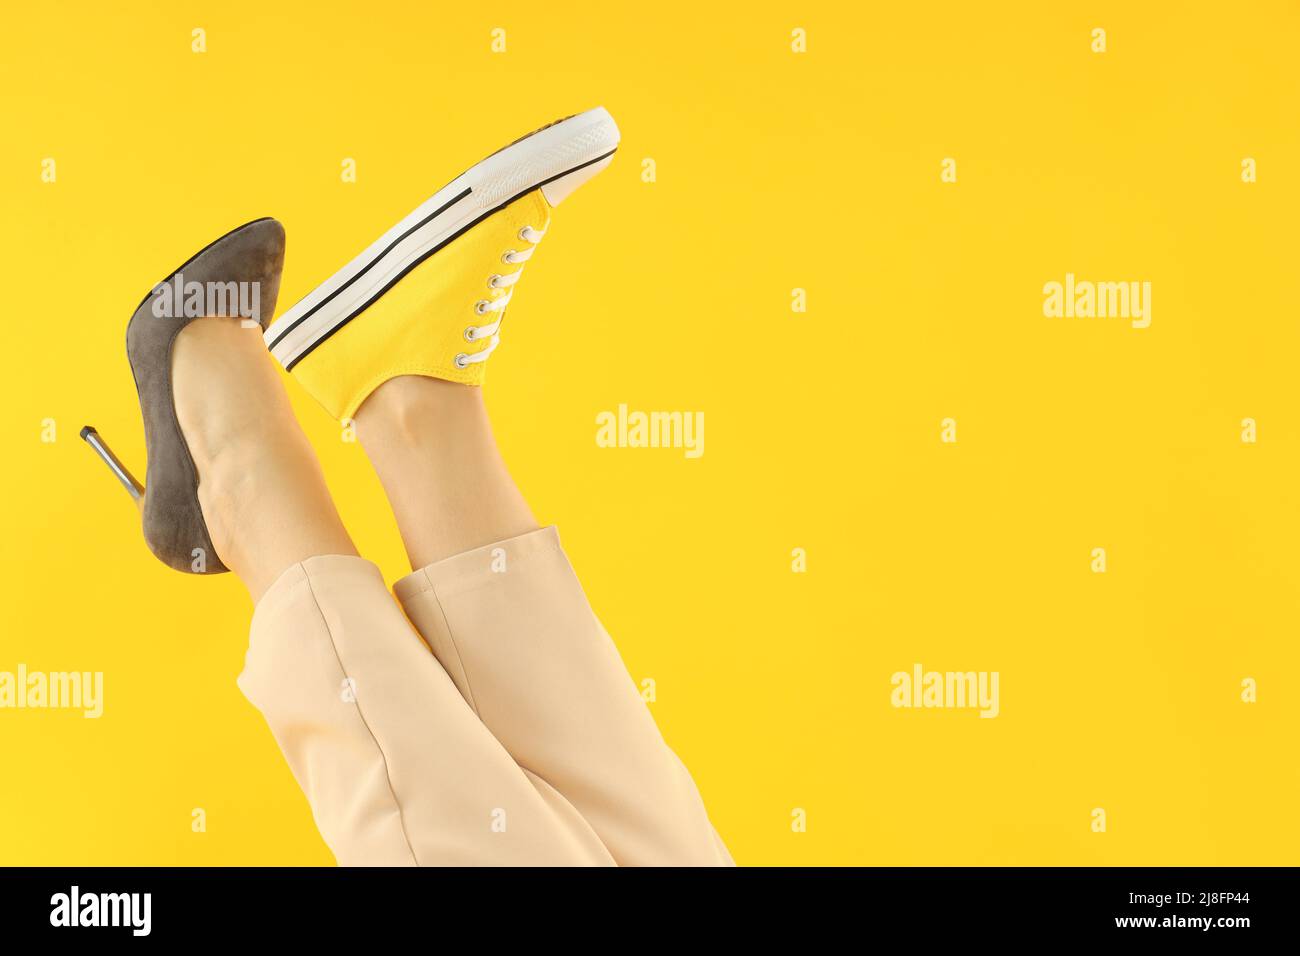 Female legs in heel and sneaker on yellow background Stock Photo